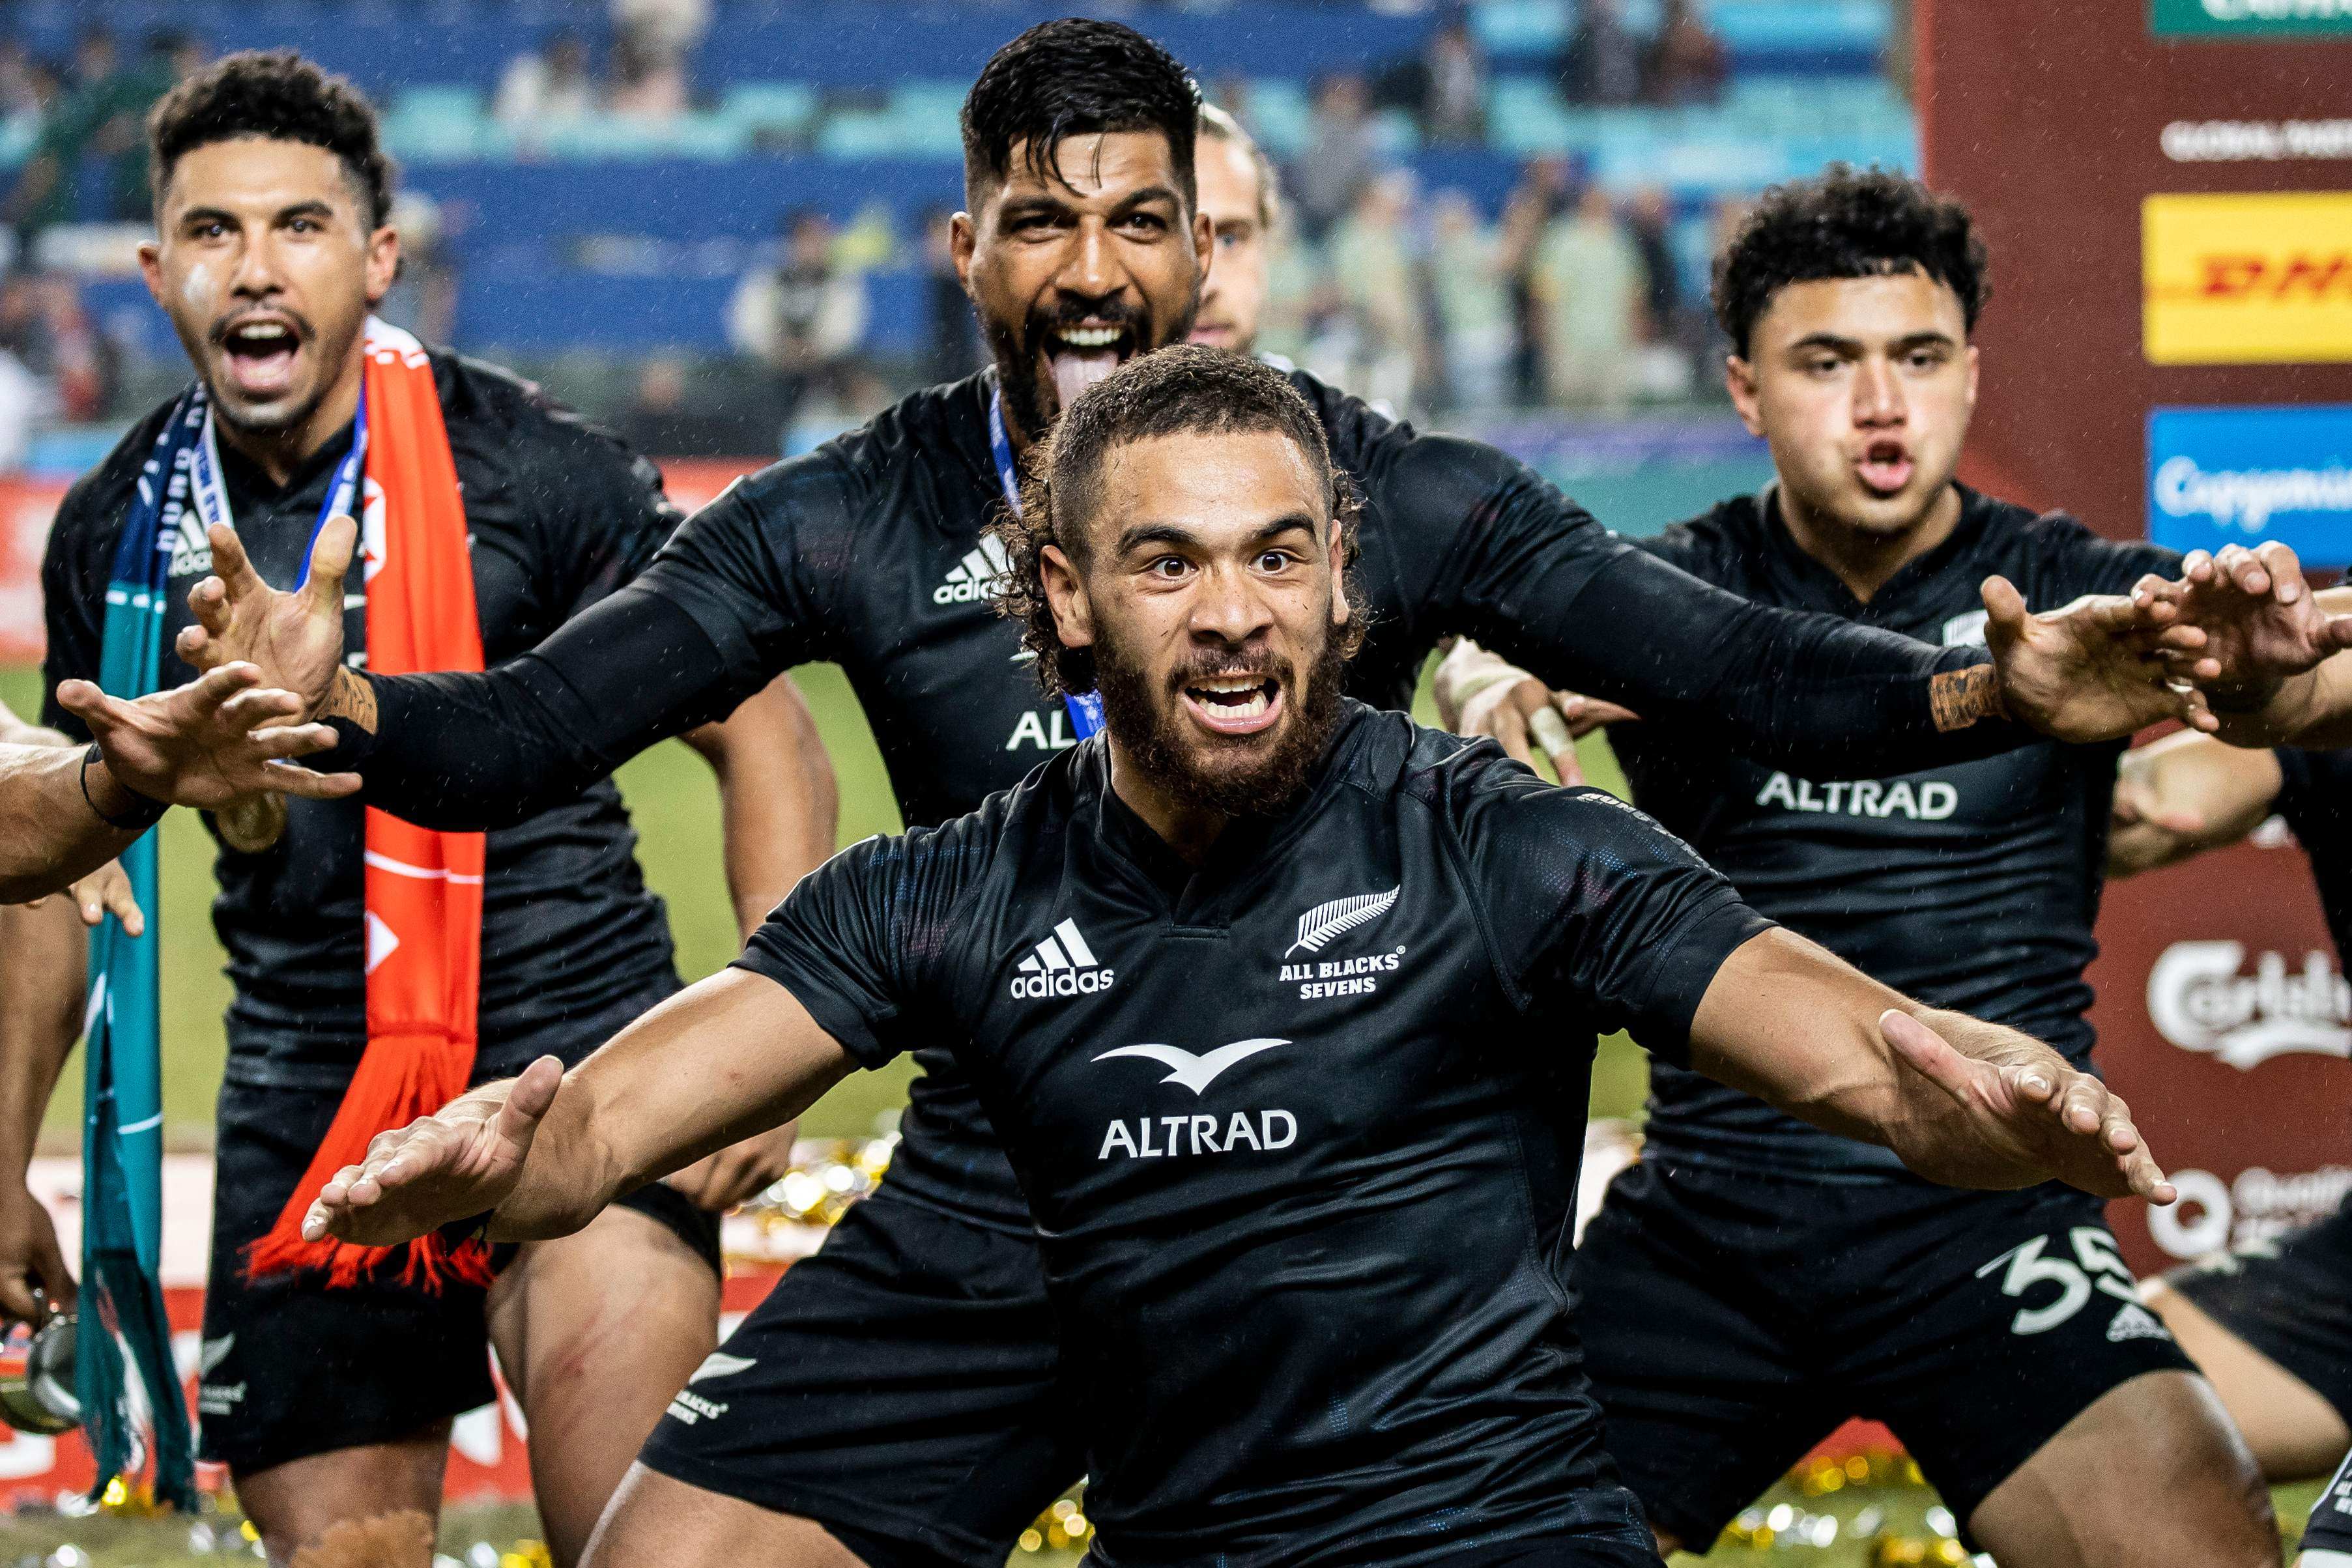 New Zealand perform the Haka after defeating Fiji in the final on the third day of the Hong Kong Sevens rugby tournament on Sunday. Photo: AFP